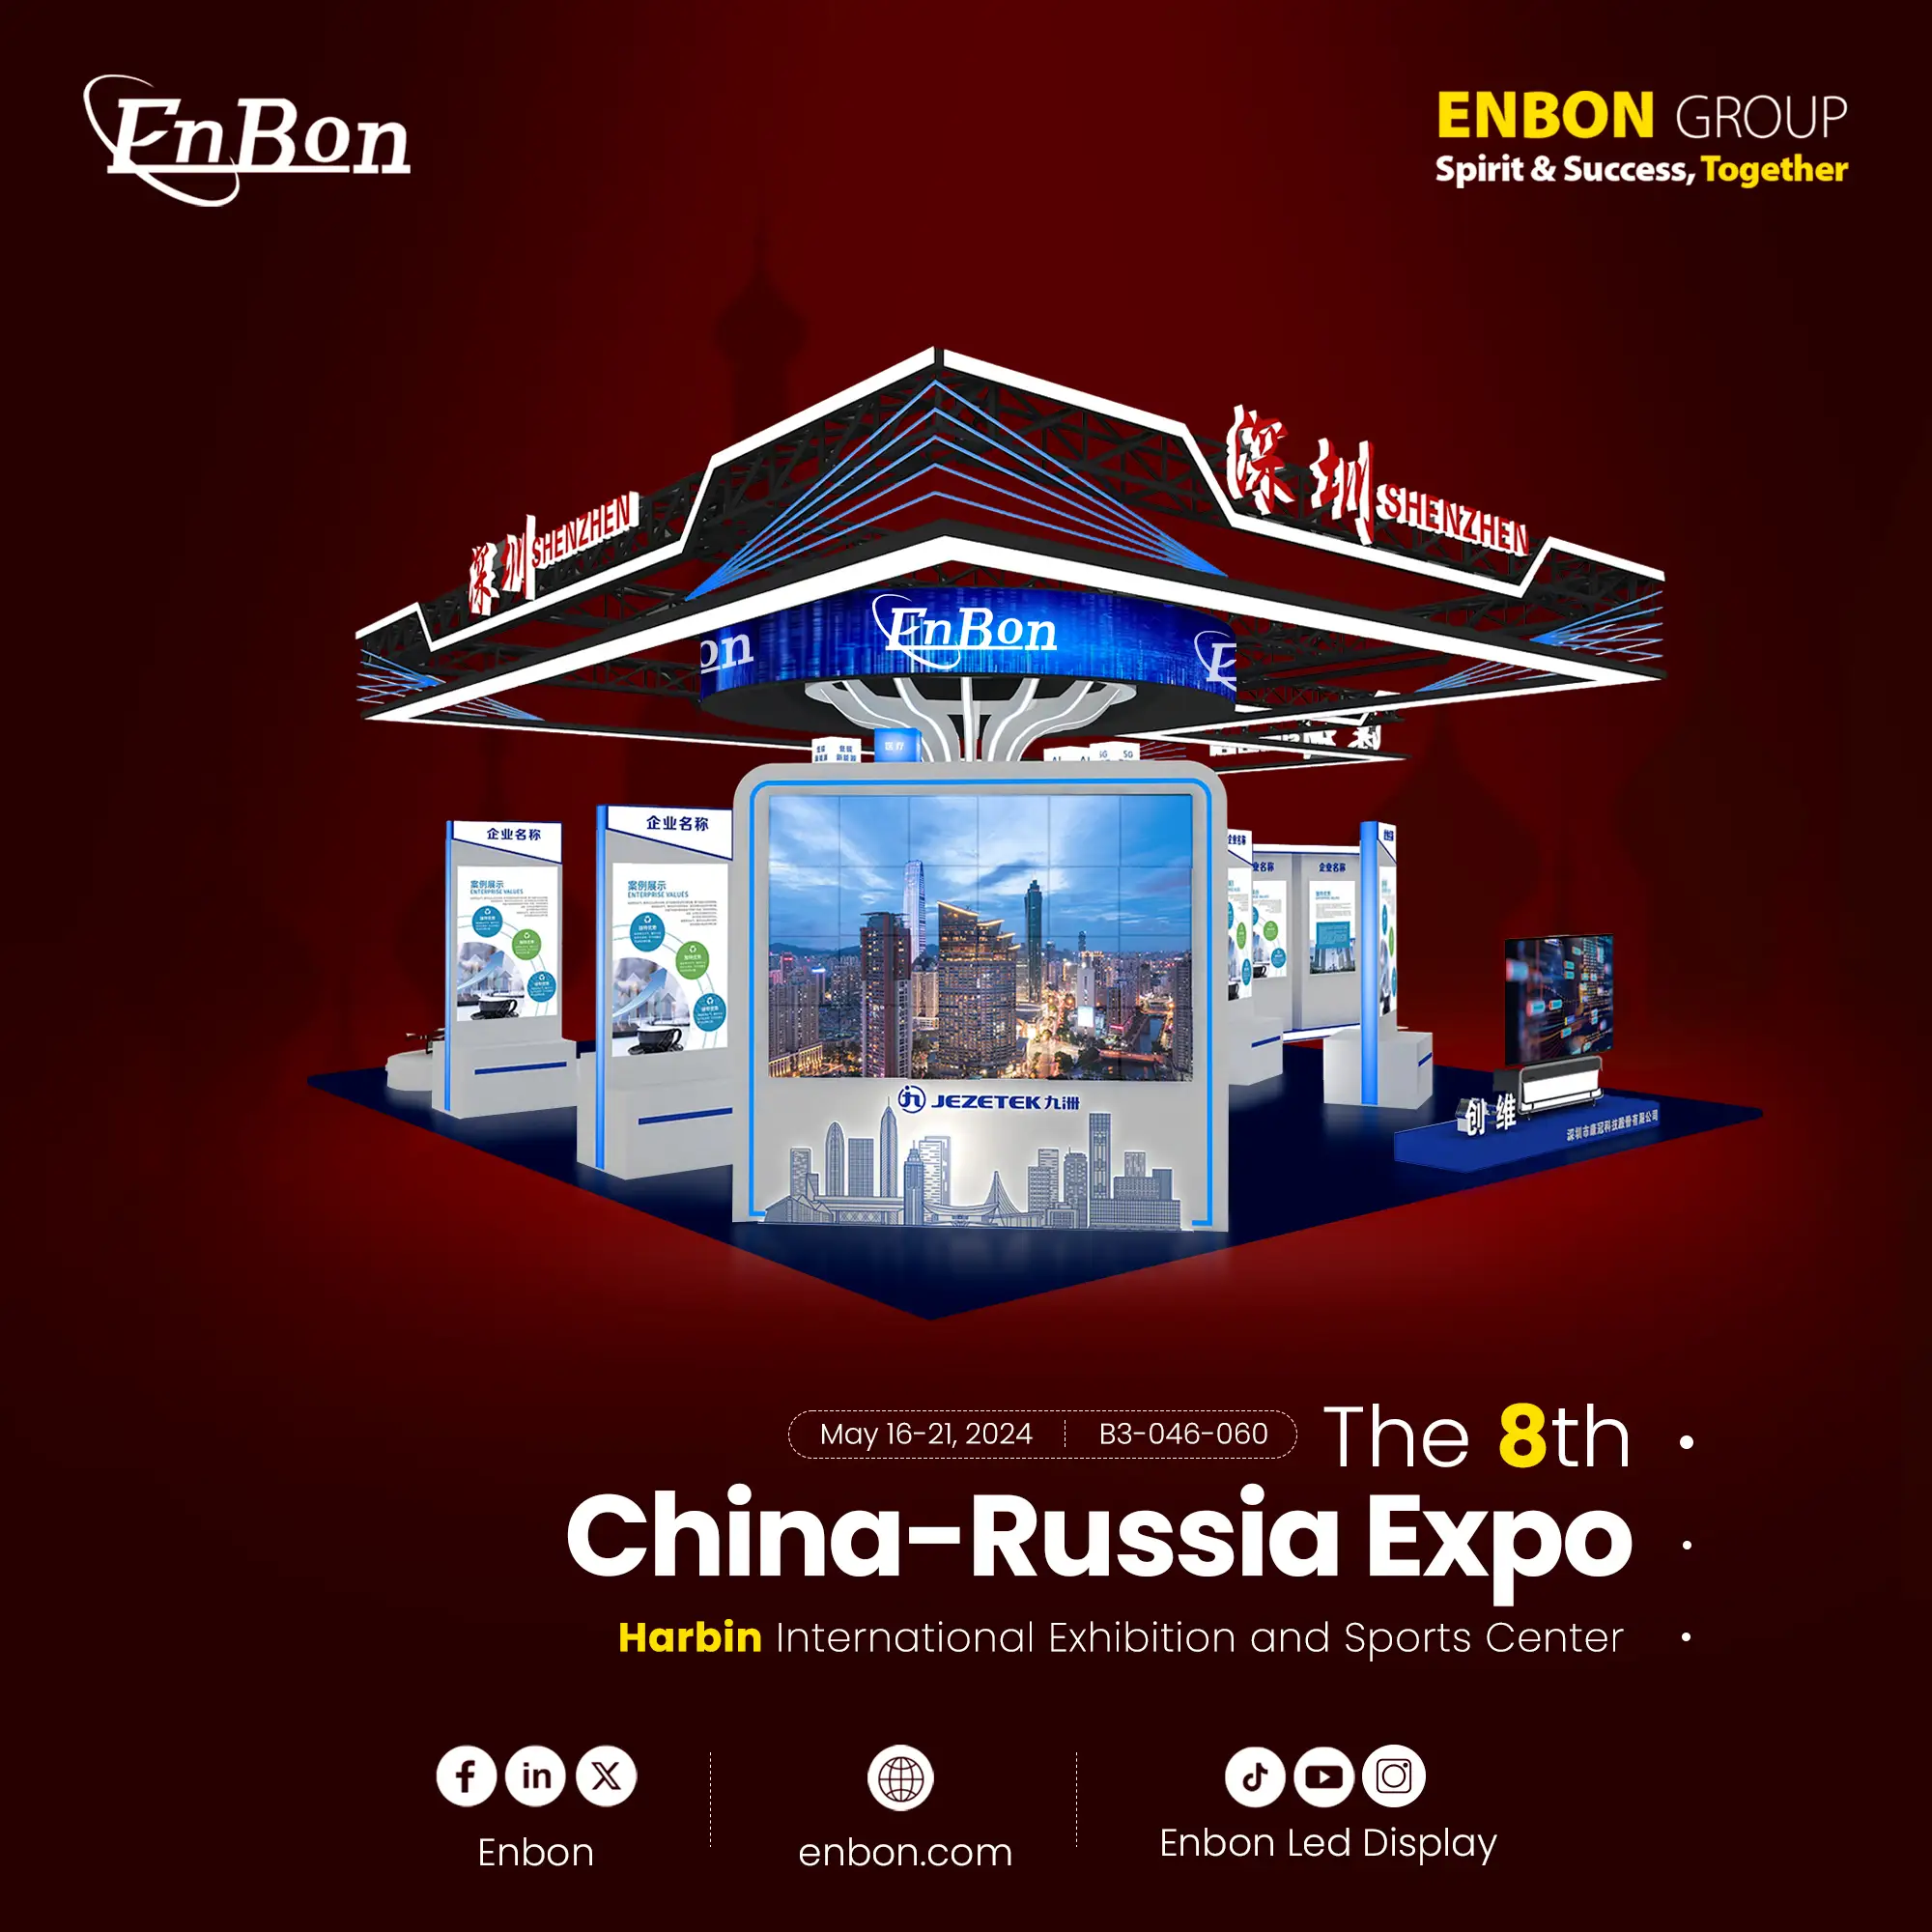 Enbon to Shine Brightly at the China-Russia Expo